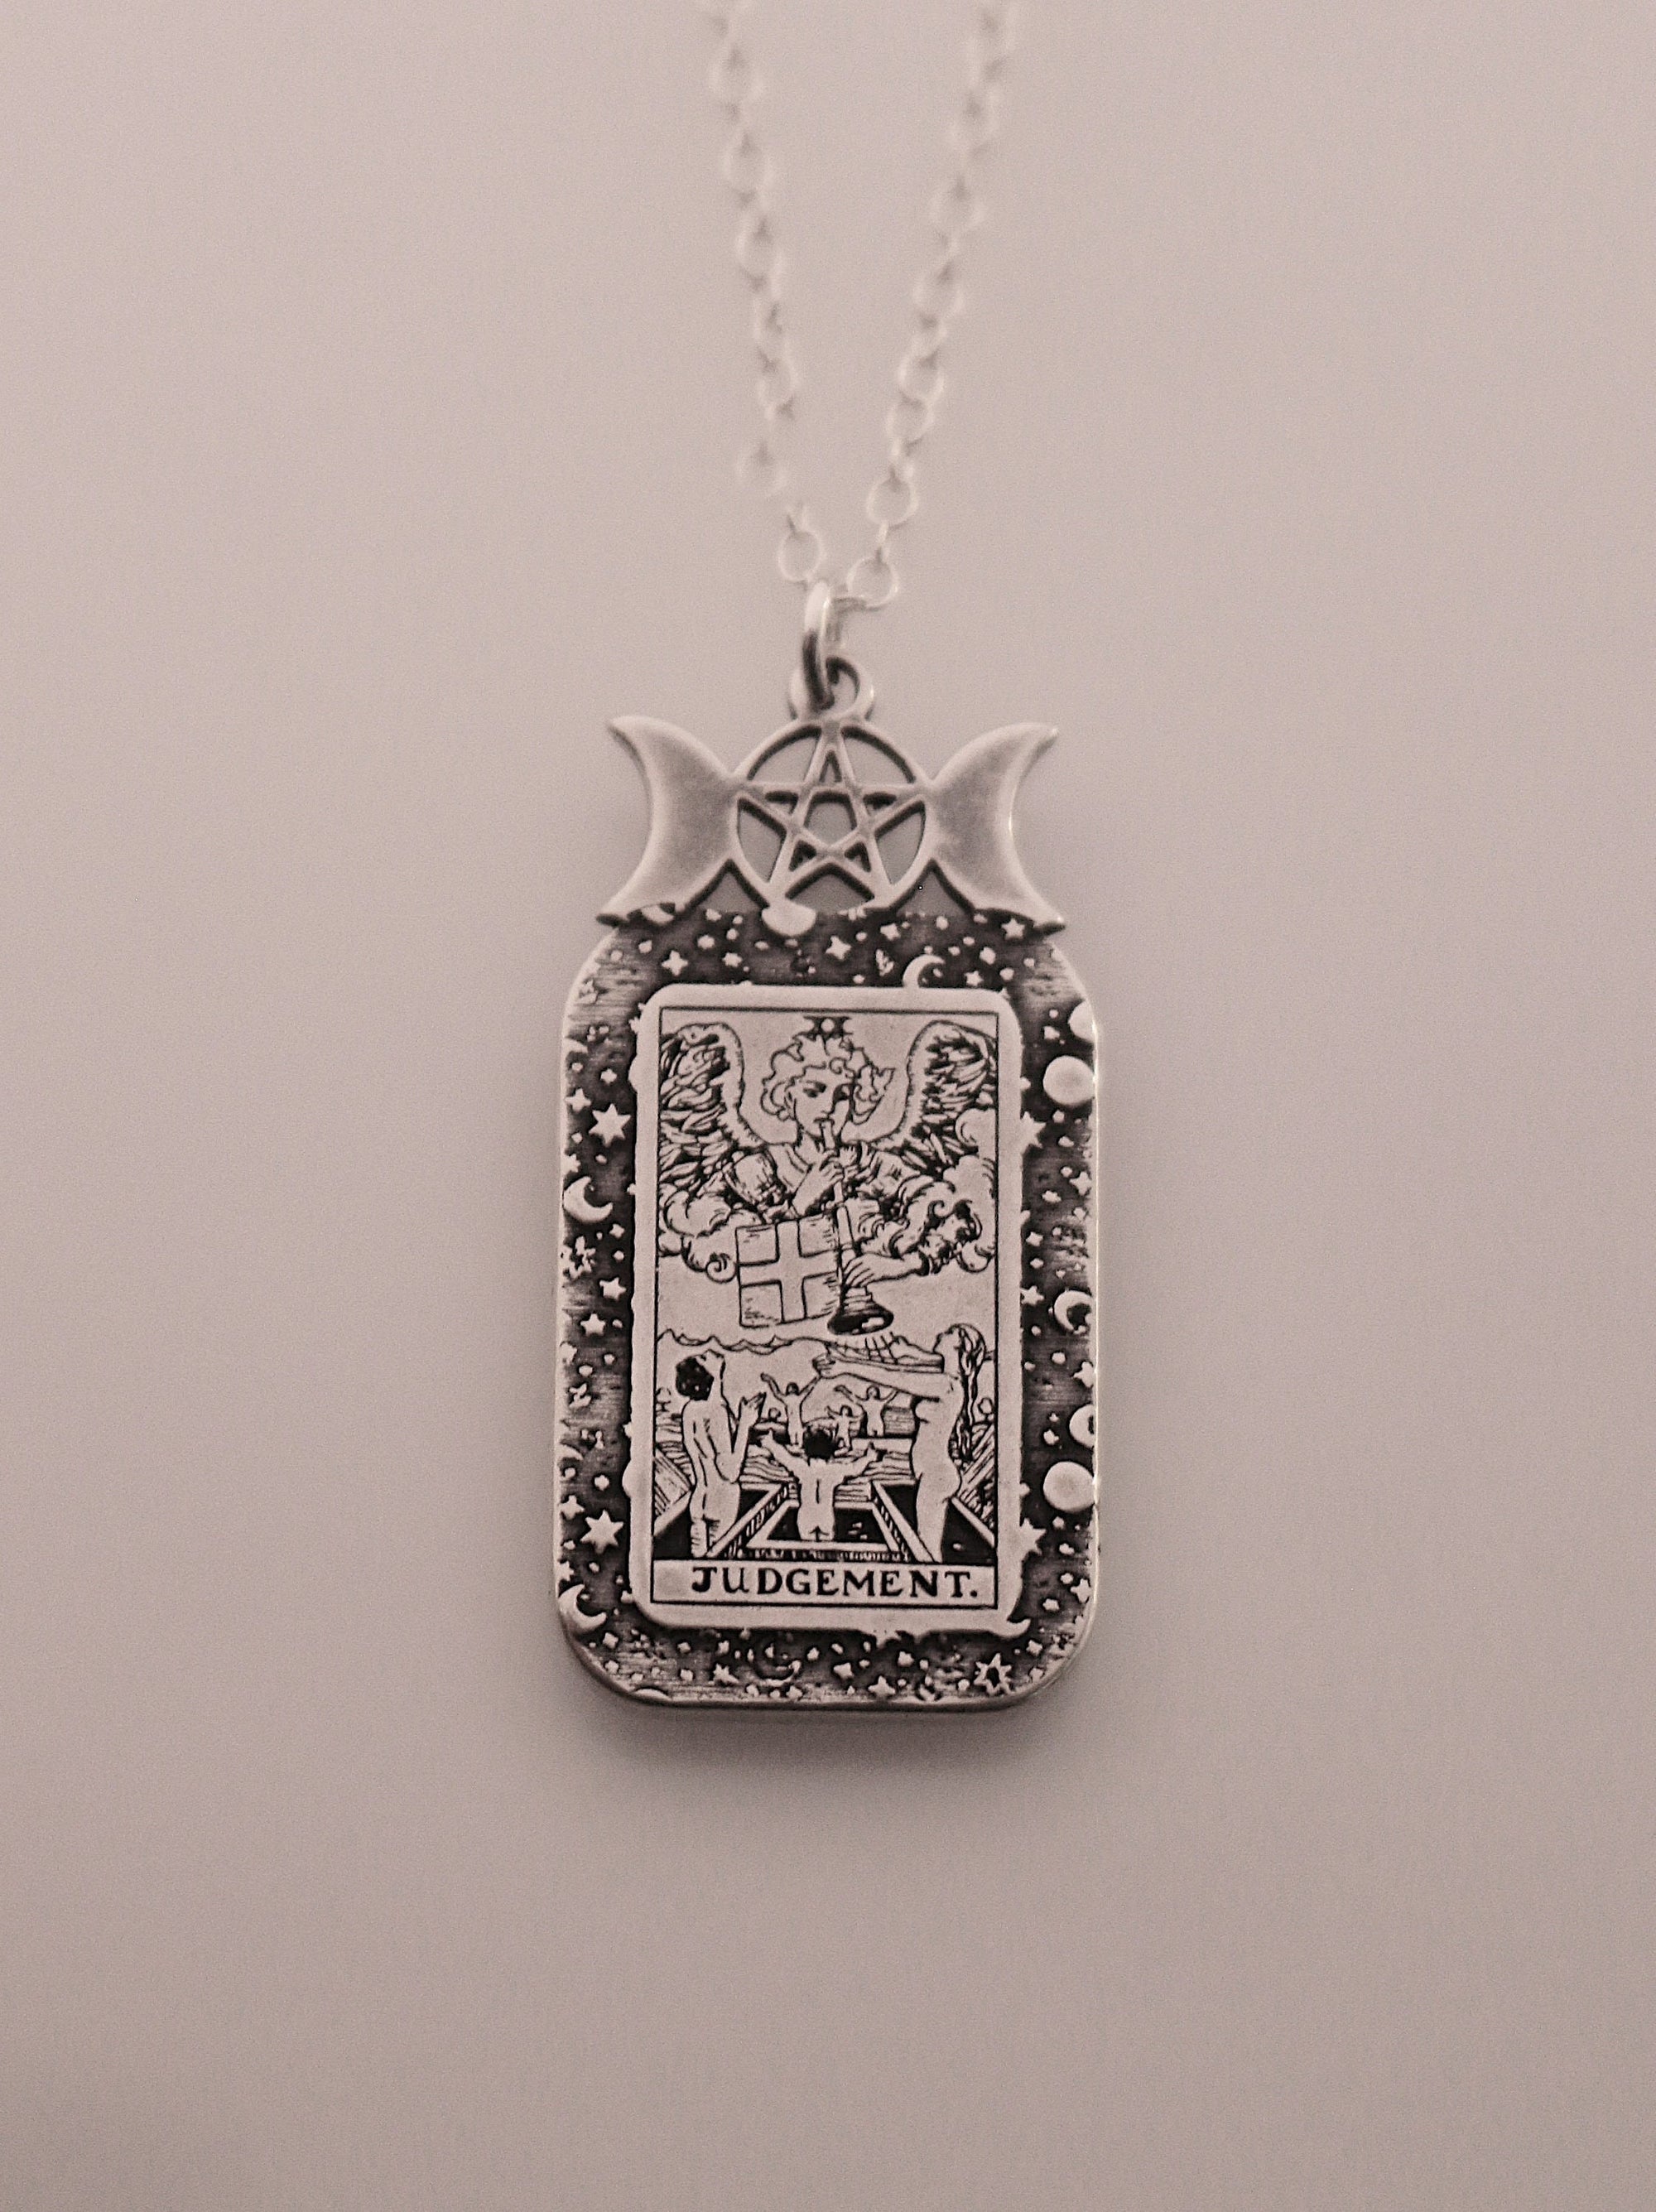 Judgement Tarot Card Necklace | Best Friend Birthday Gift | Tarot Card Necklace | Celestial Triple Moon Goddess Jewelry | Witch Necklace